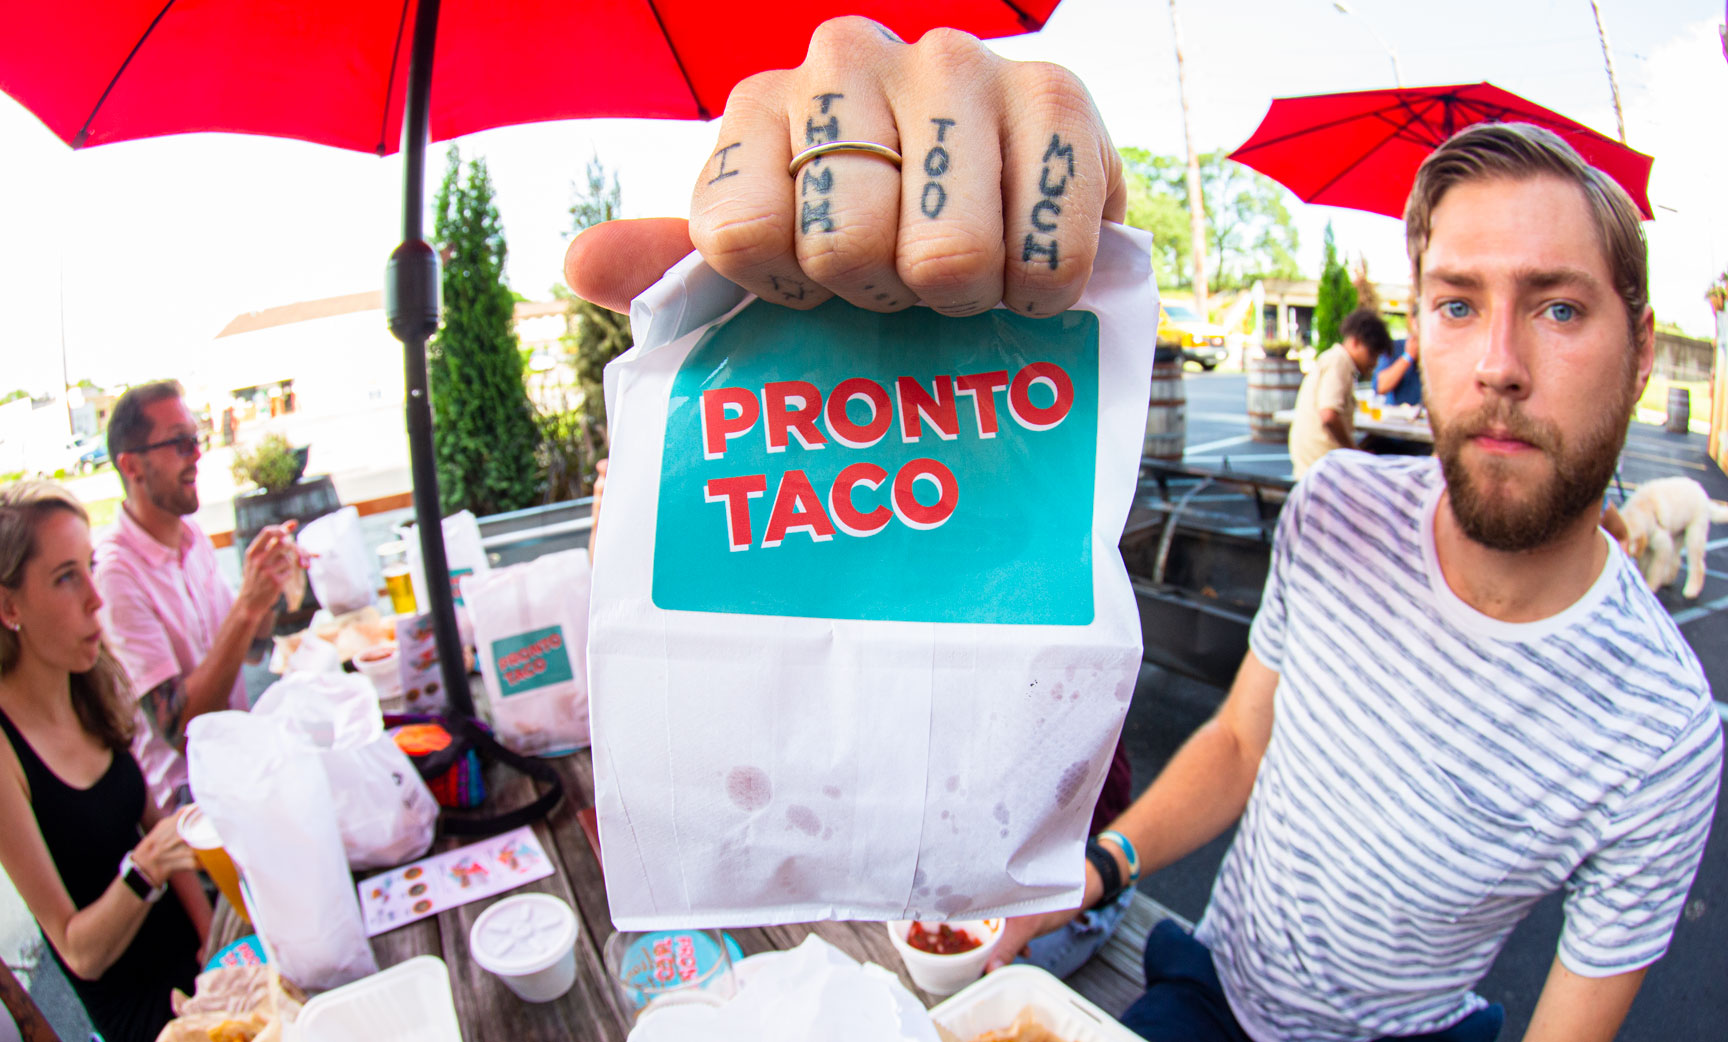 Fish eye lens photo of people eating Pronto Taco food at an outdoor table with Pronto Taco mobile kitchen in background